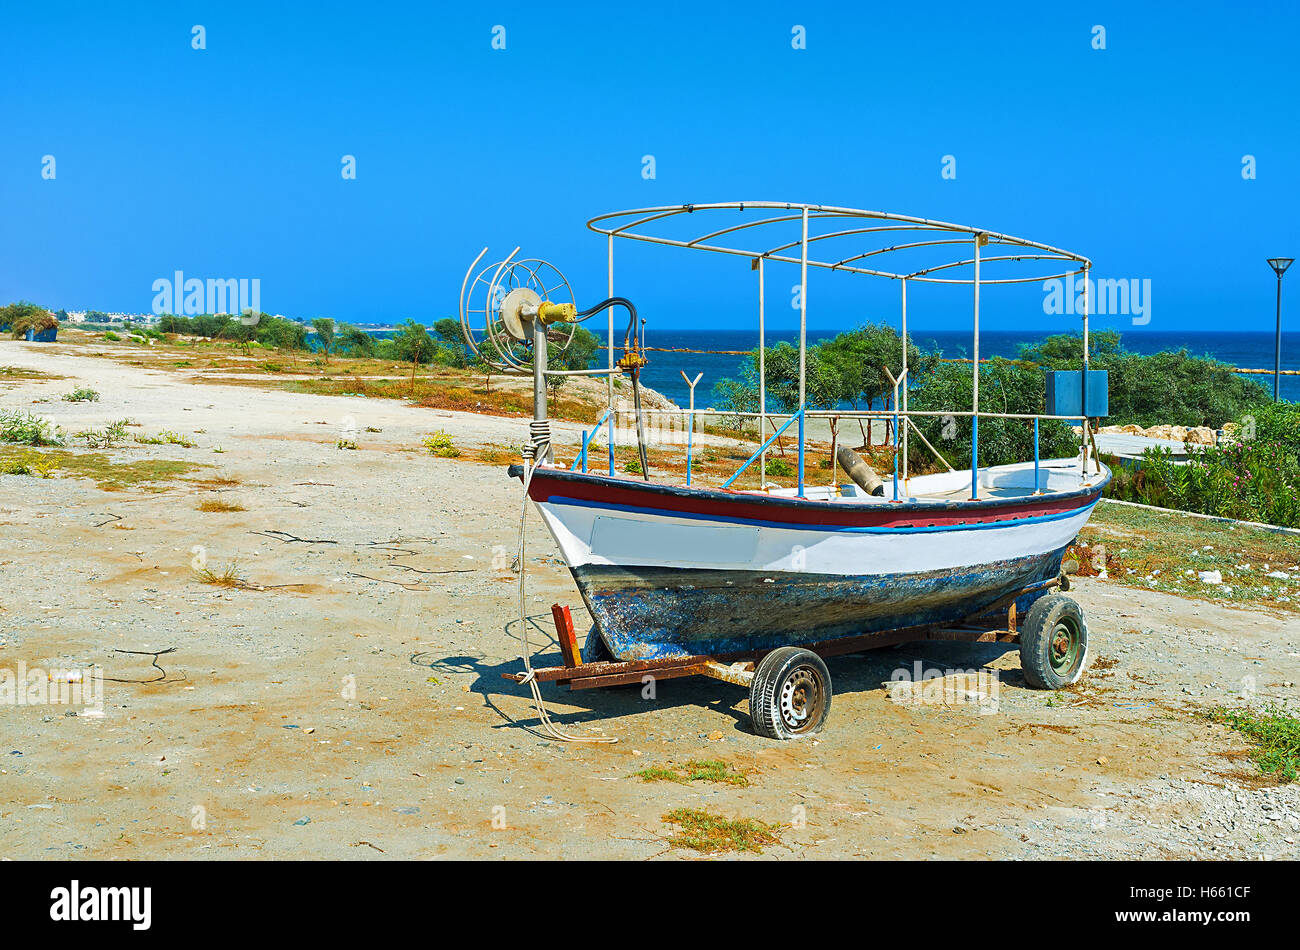 The old boat like the symbol of the fishing village welcomes tourists, coming to Zugi, Cyprus. Stock Photo